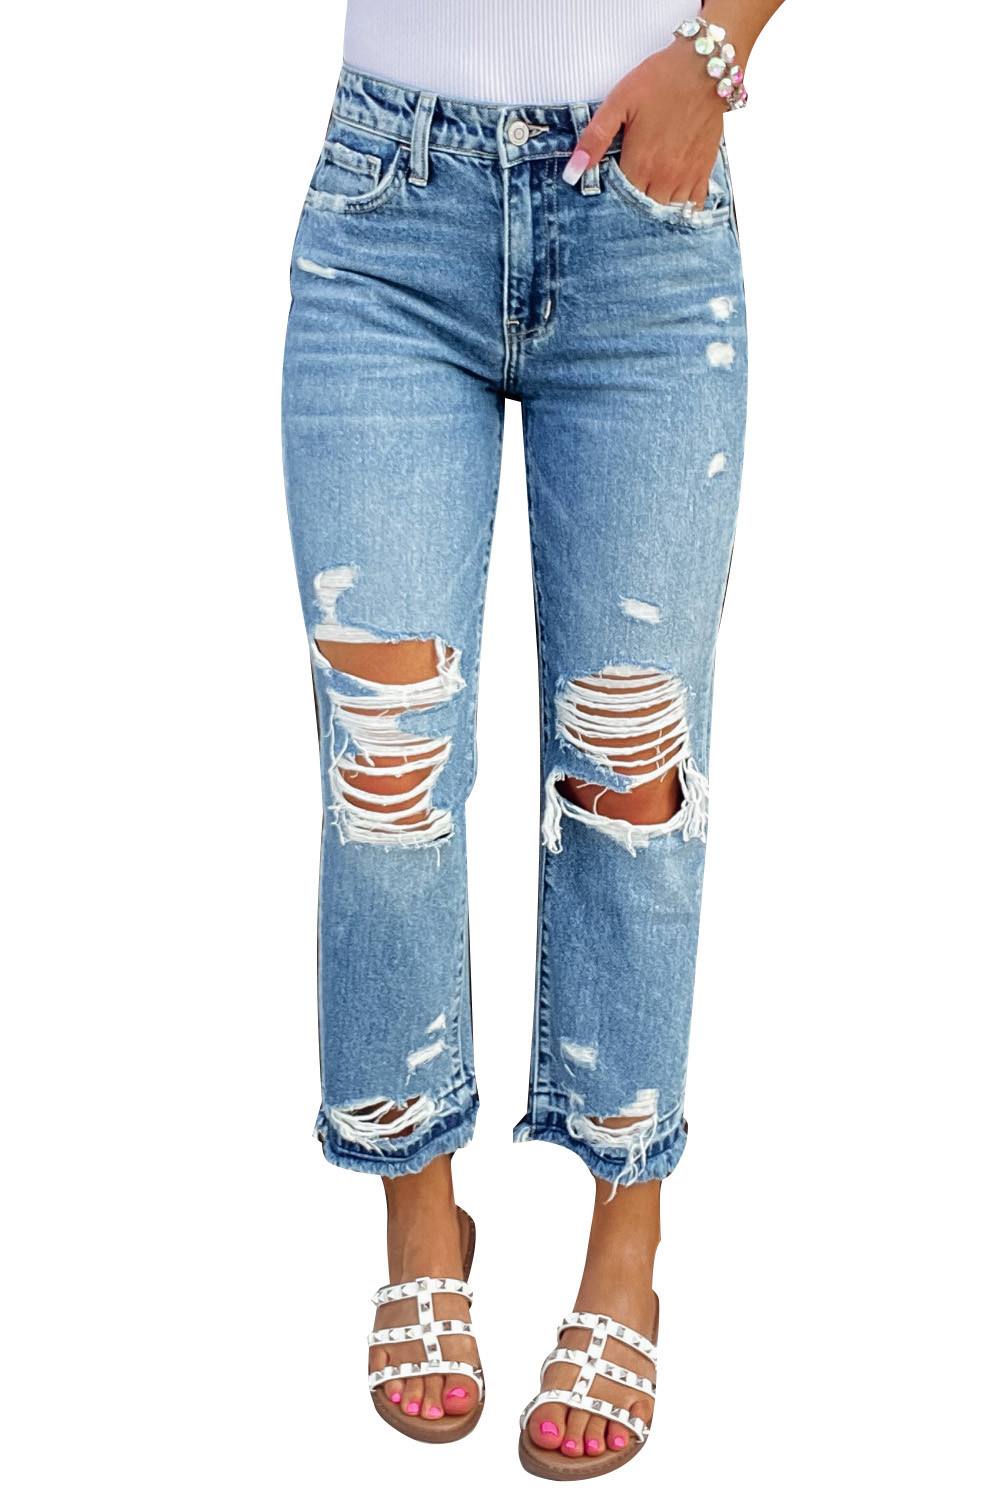 US$10.98 Sky Blue Raw Hem Ripped Ankle Jeans with Pockets Wholesale Online